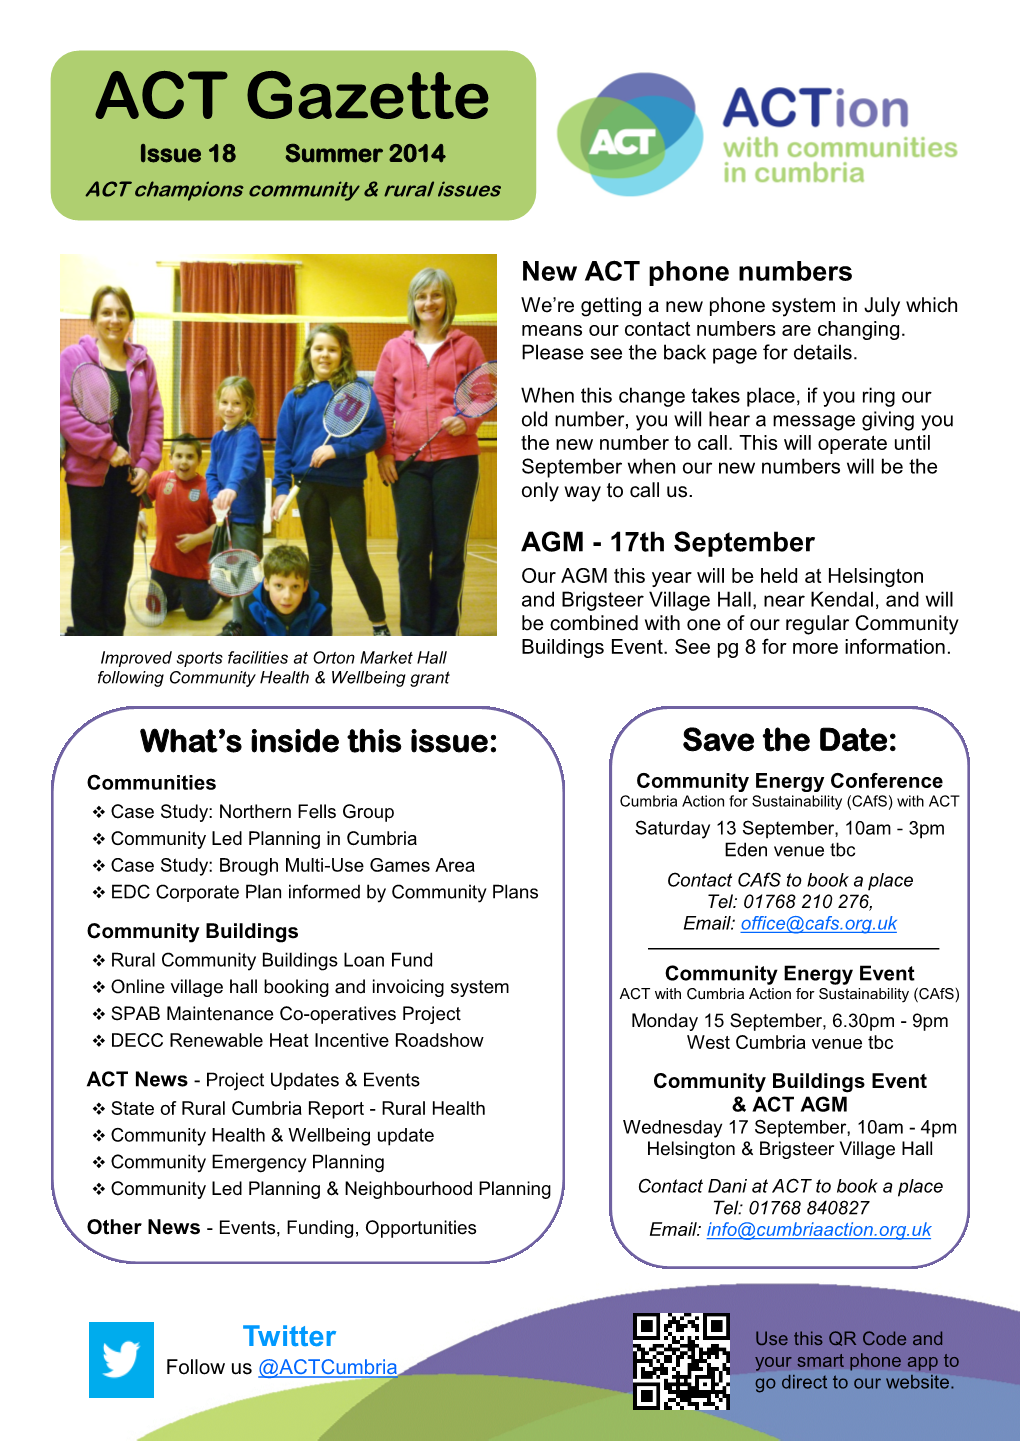 ACT Gazette Issue 18 Summer 2014 ACT Champions Community & Rural Issues